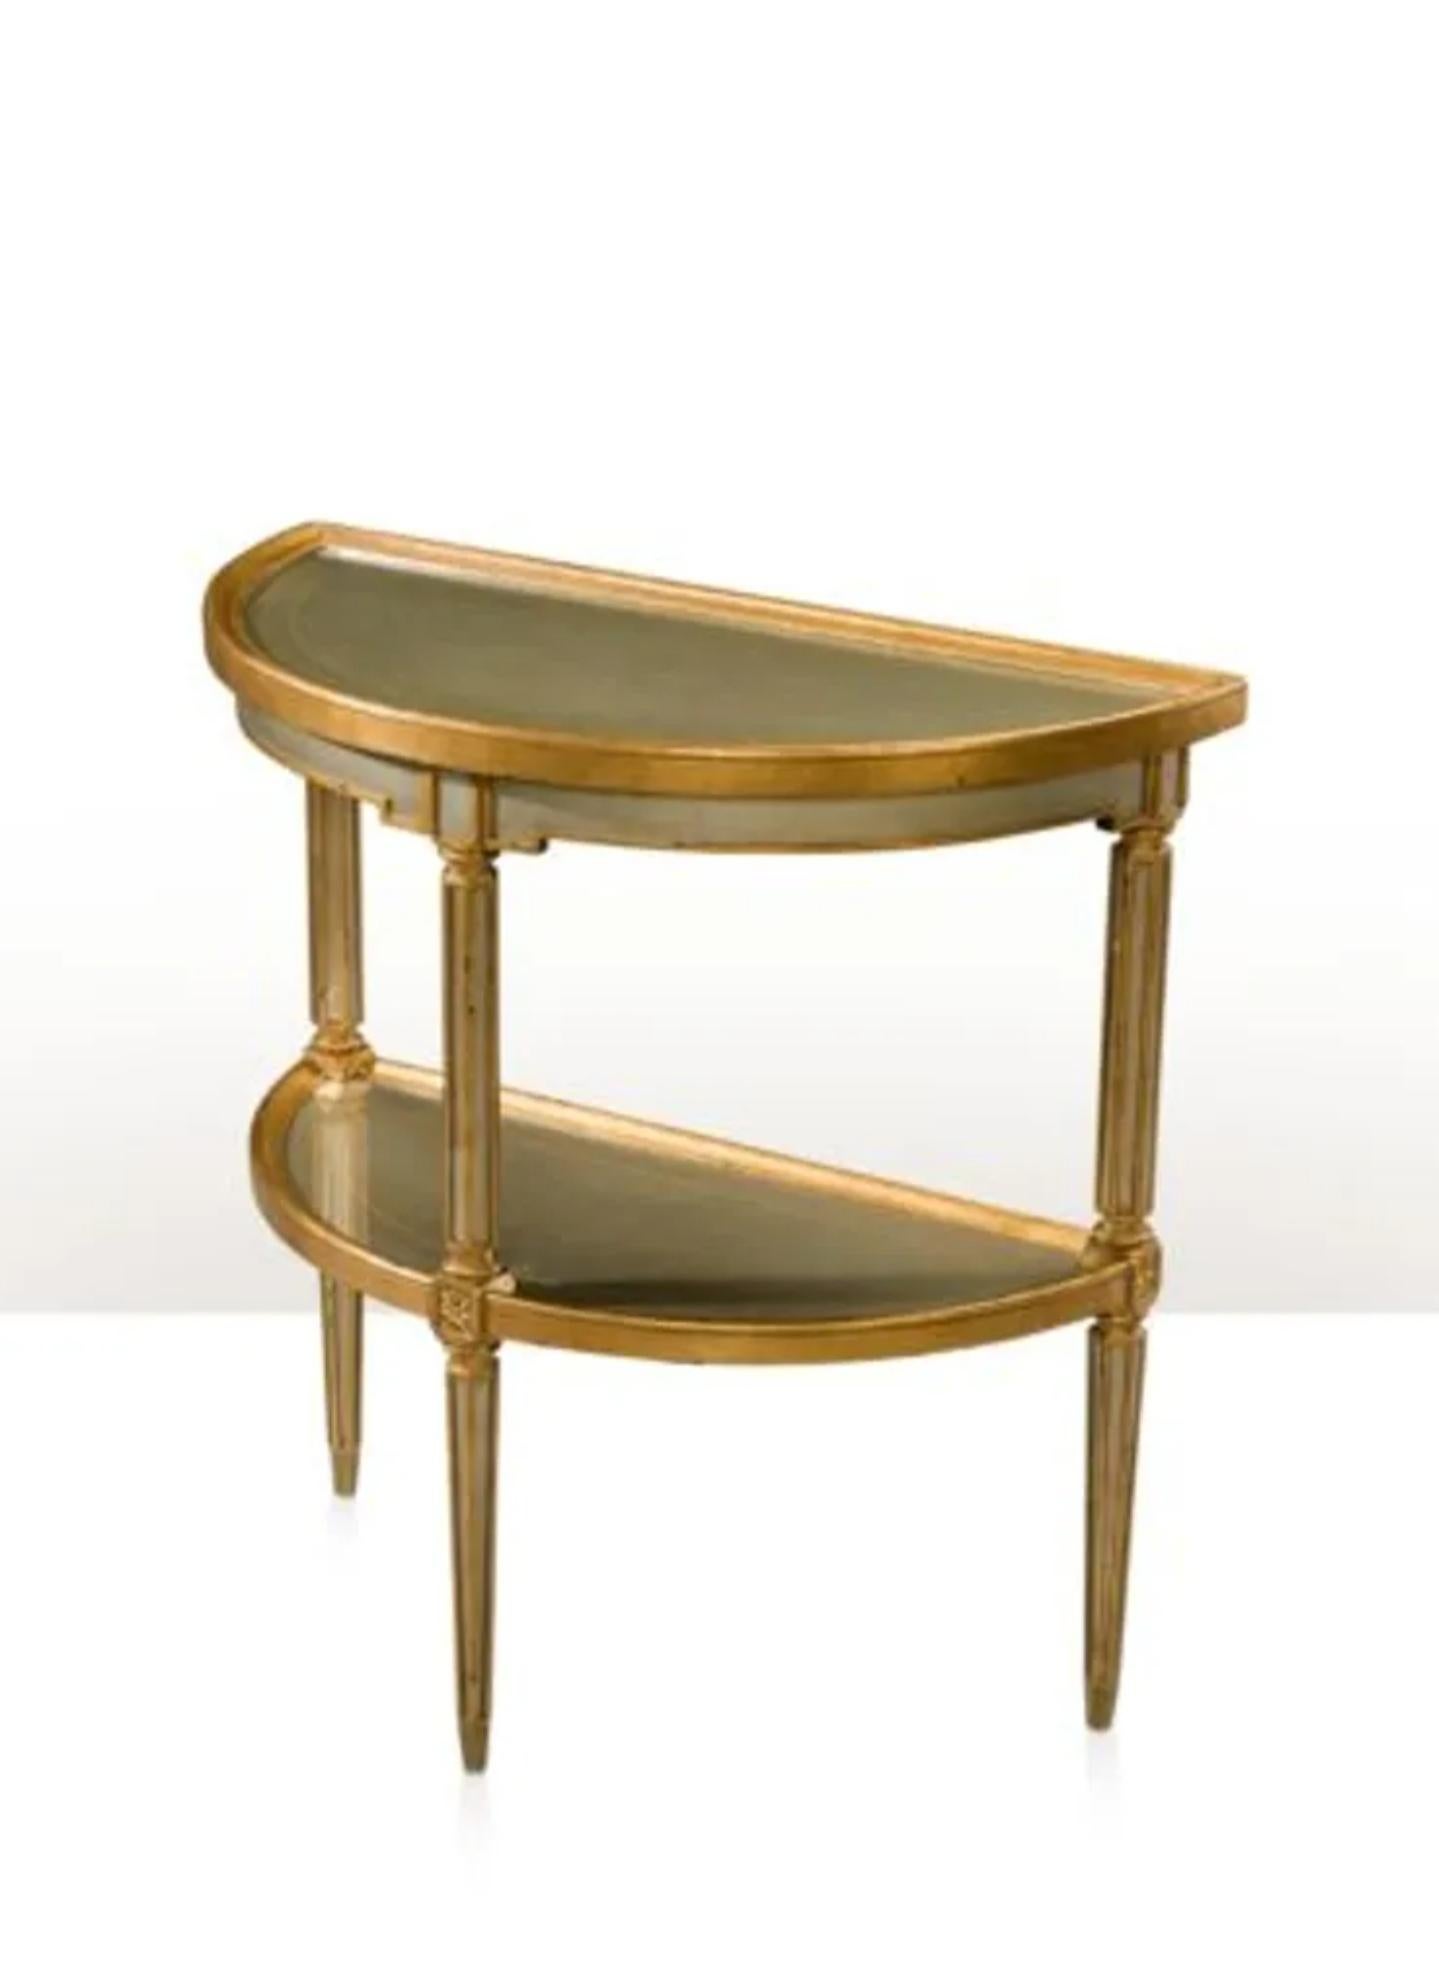 Theodore Alexander Venetian Waters Eglomise Demilune Console Table 6